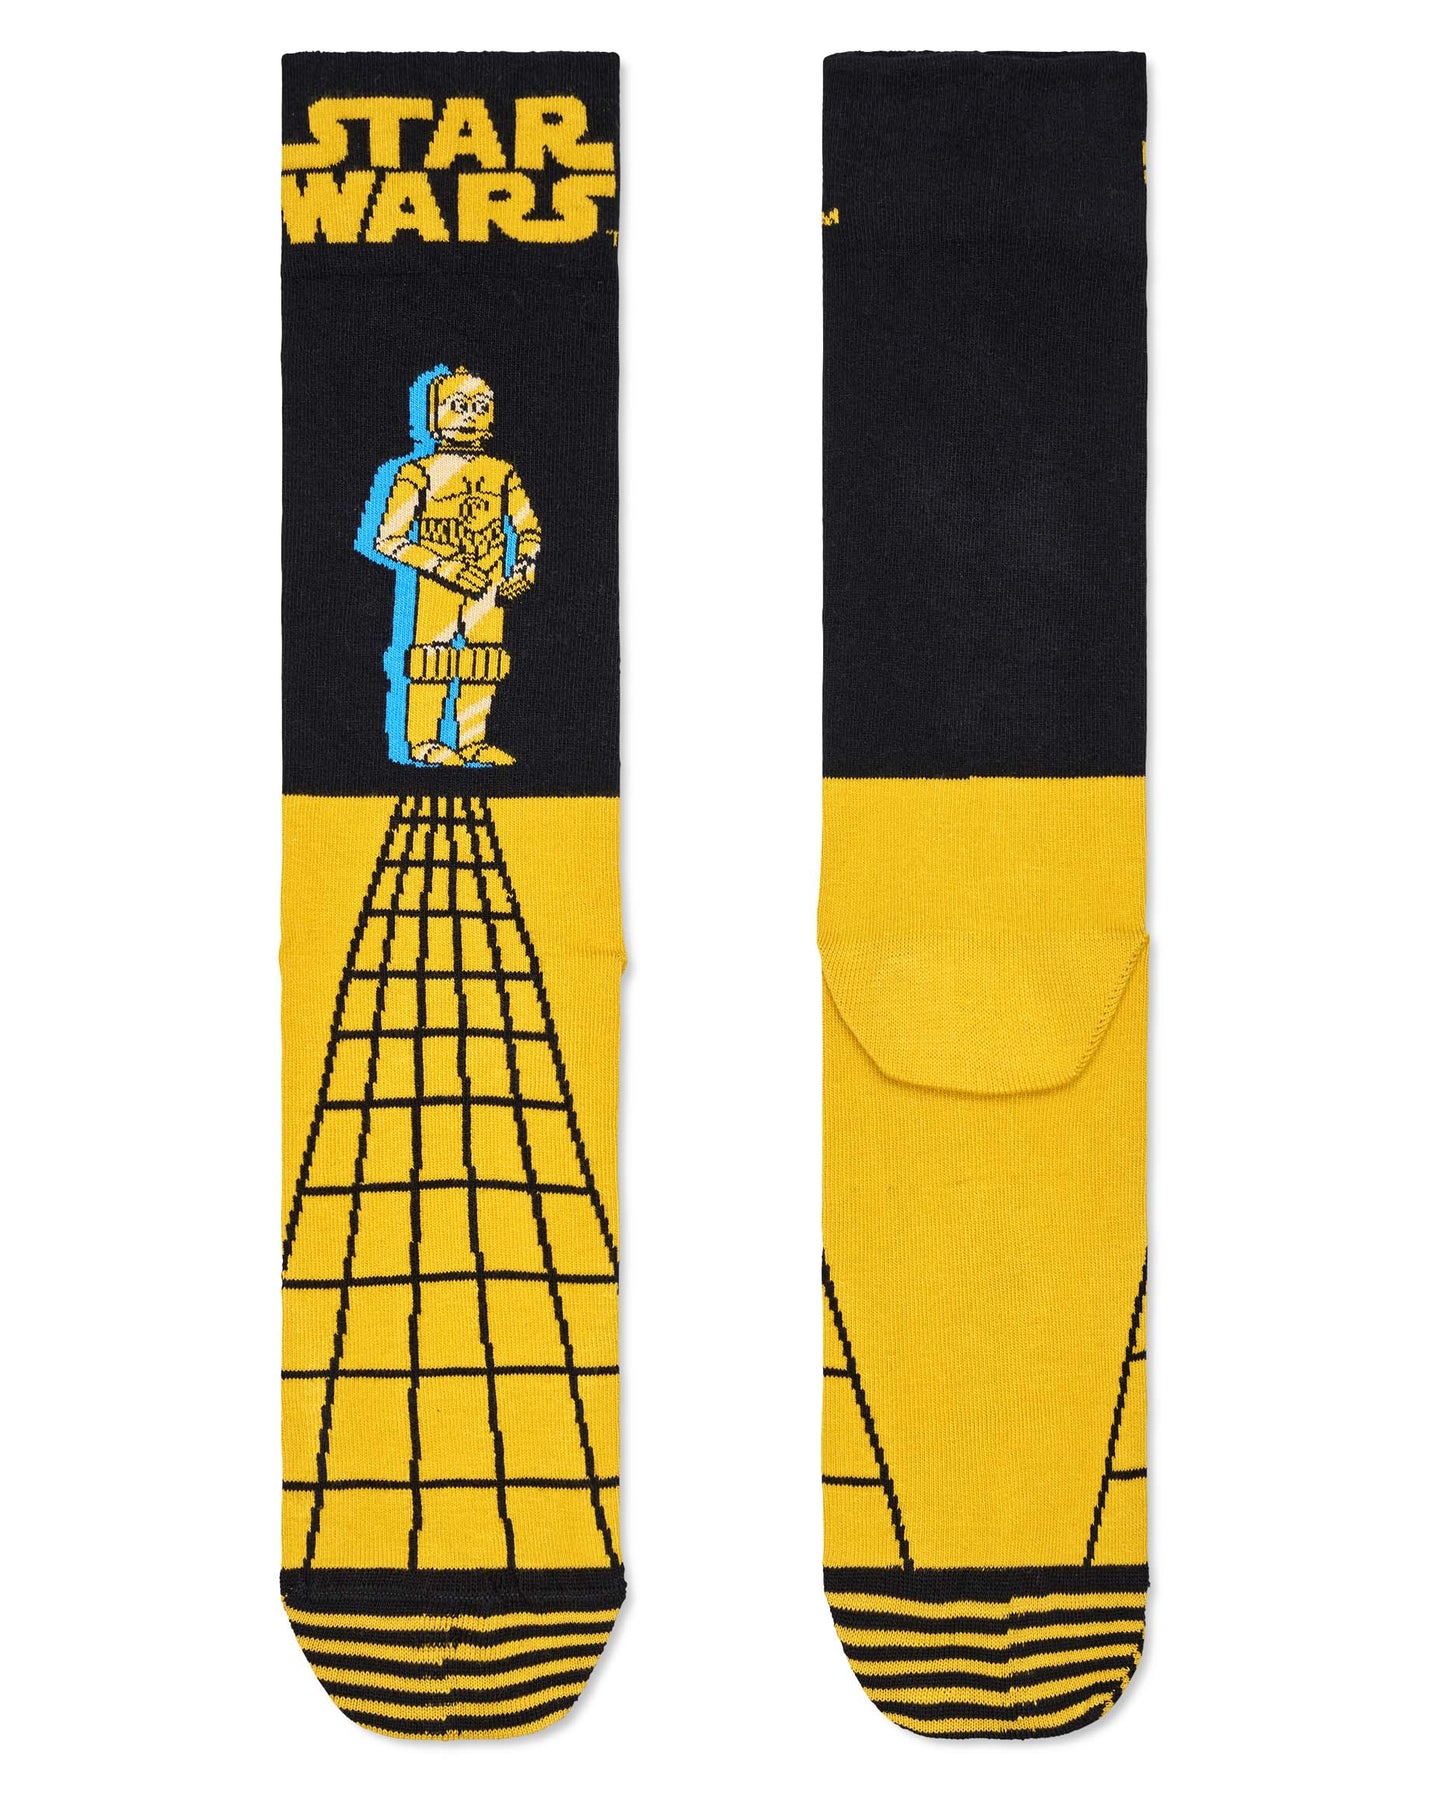 Happy Socks C-3PO Sock - Cotton crew length socks with Star War's logo and C-3PO robot motif in yellow with a turquoise blue shadow on a black background and the bottom half is yellow with a lack linear pattern.